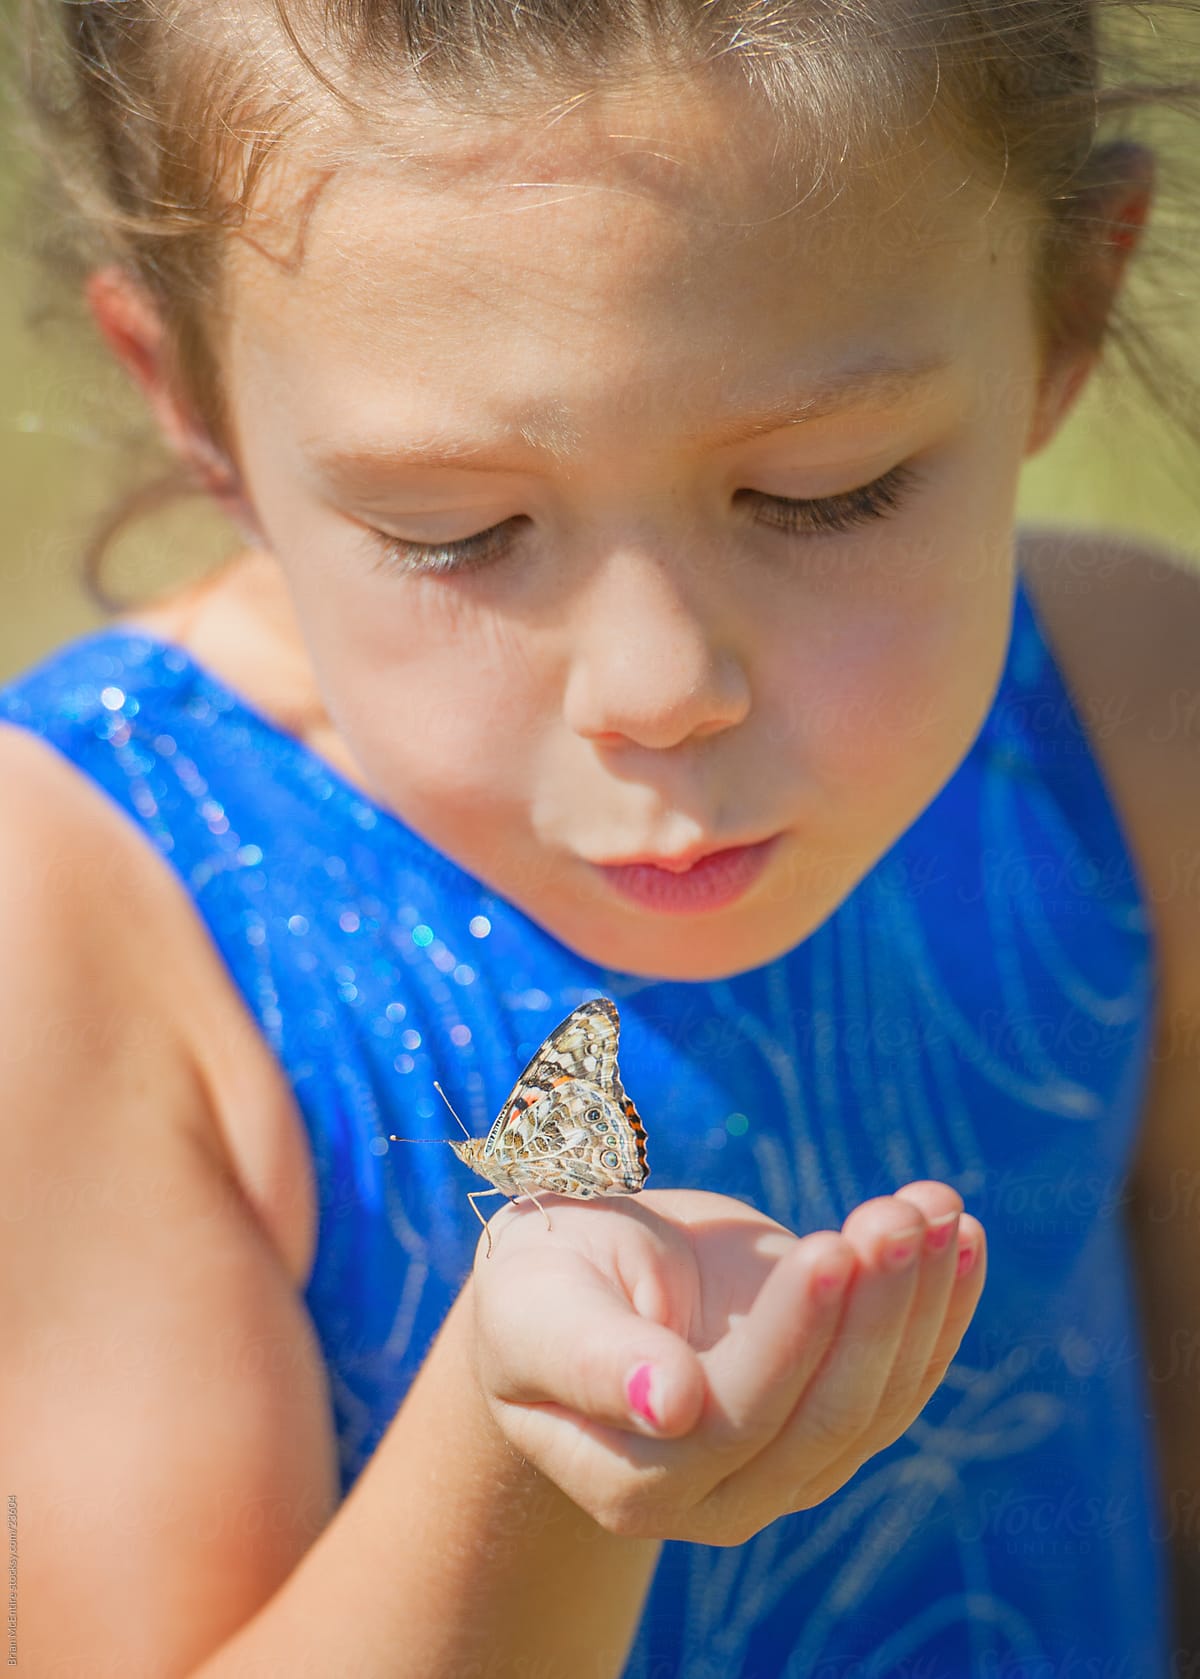 Childhood: Young Girl Blows Kiss to Butterfly on Hand